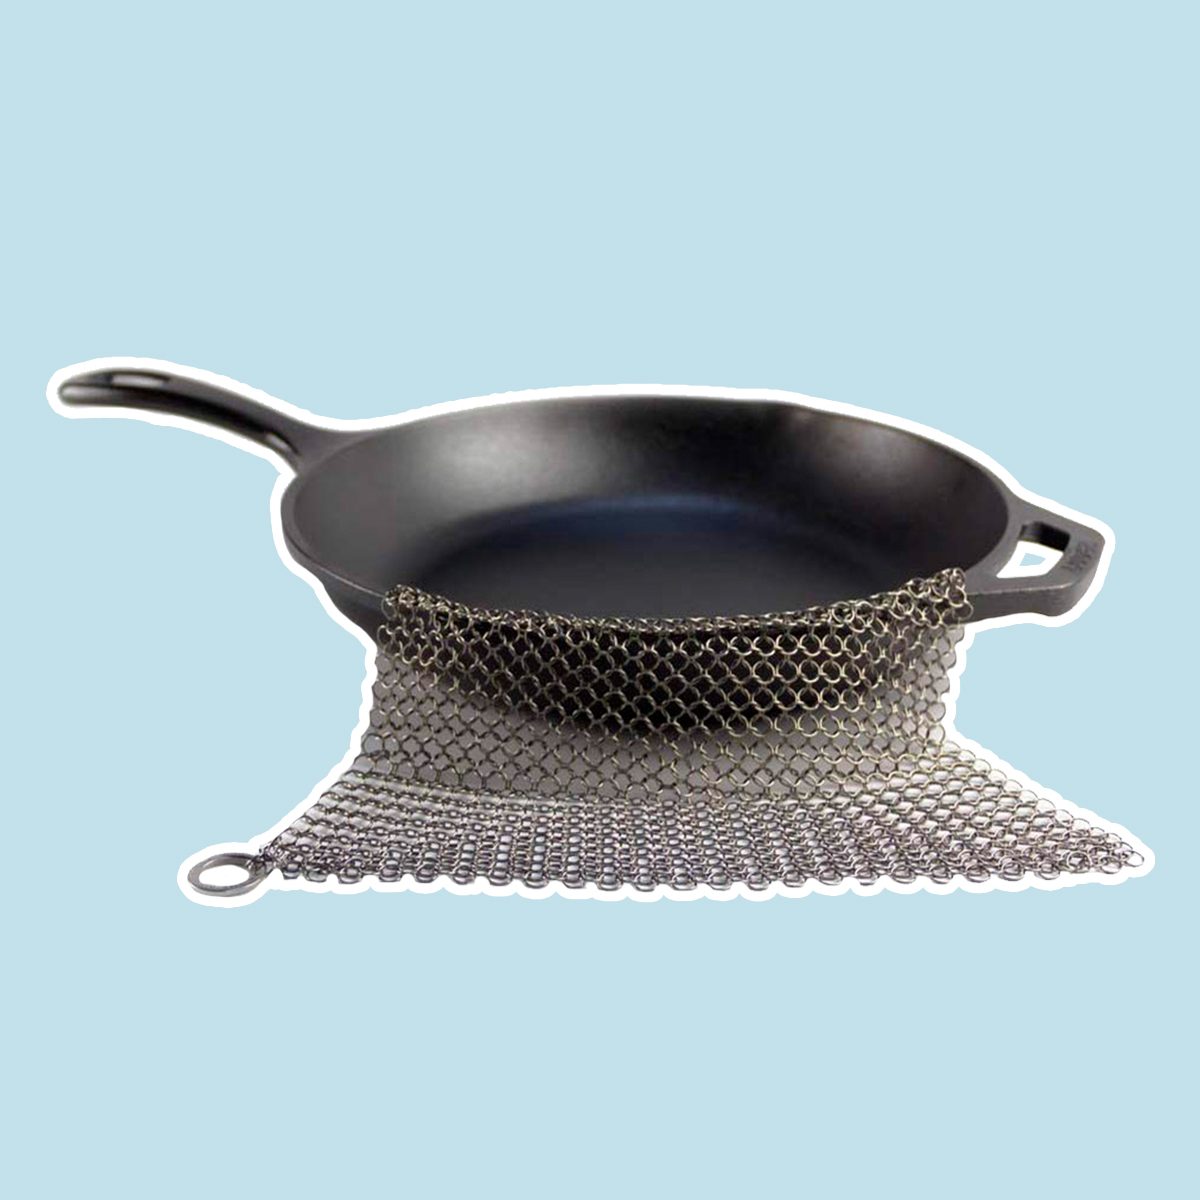 The Ringer - The Original Stainless Steel Cast Iron Cleaner 8x6 Inch - Top  Kitchen Gadget